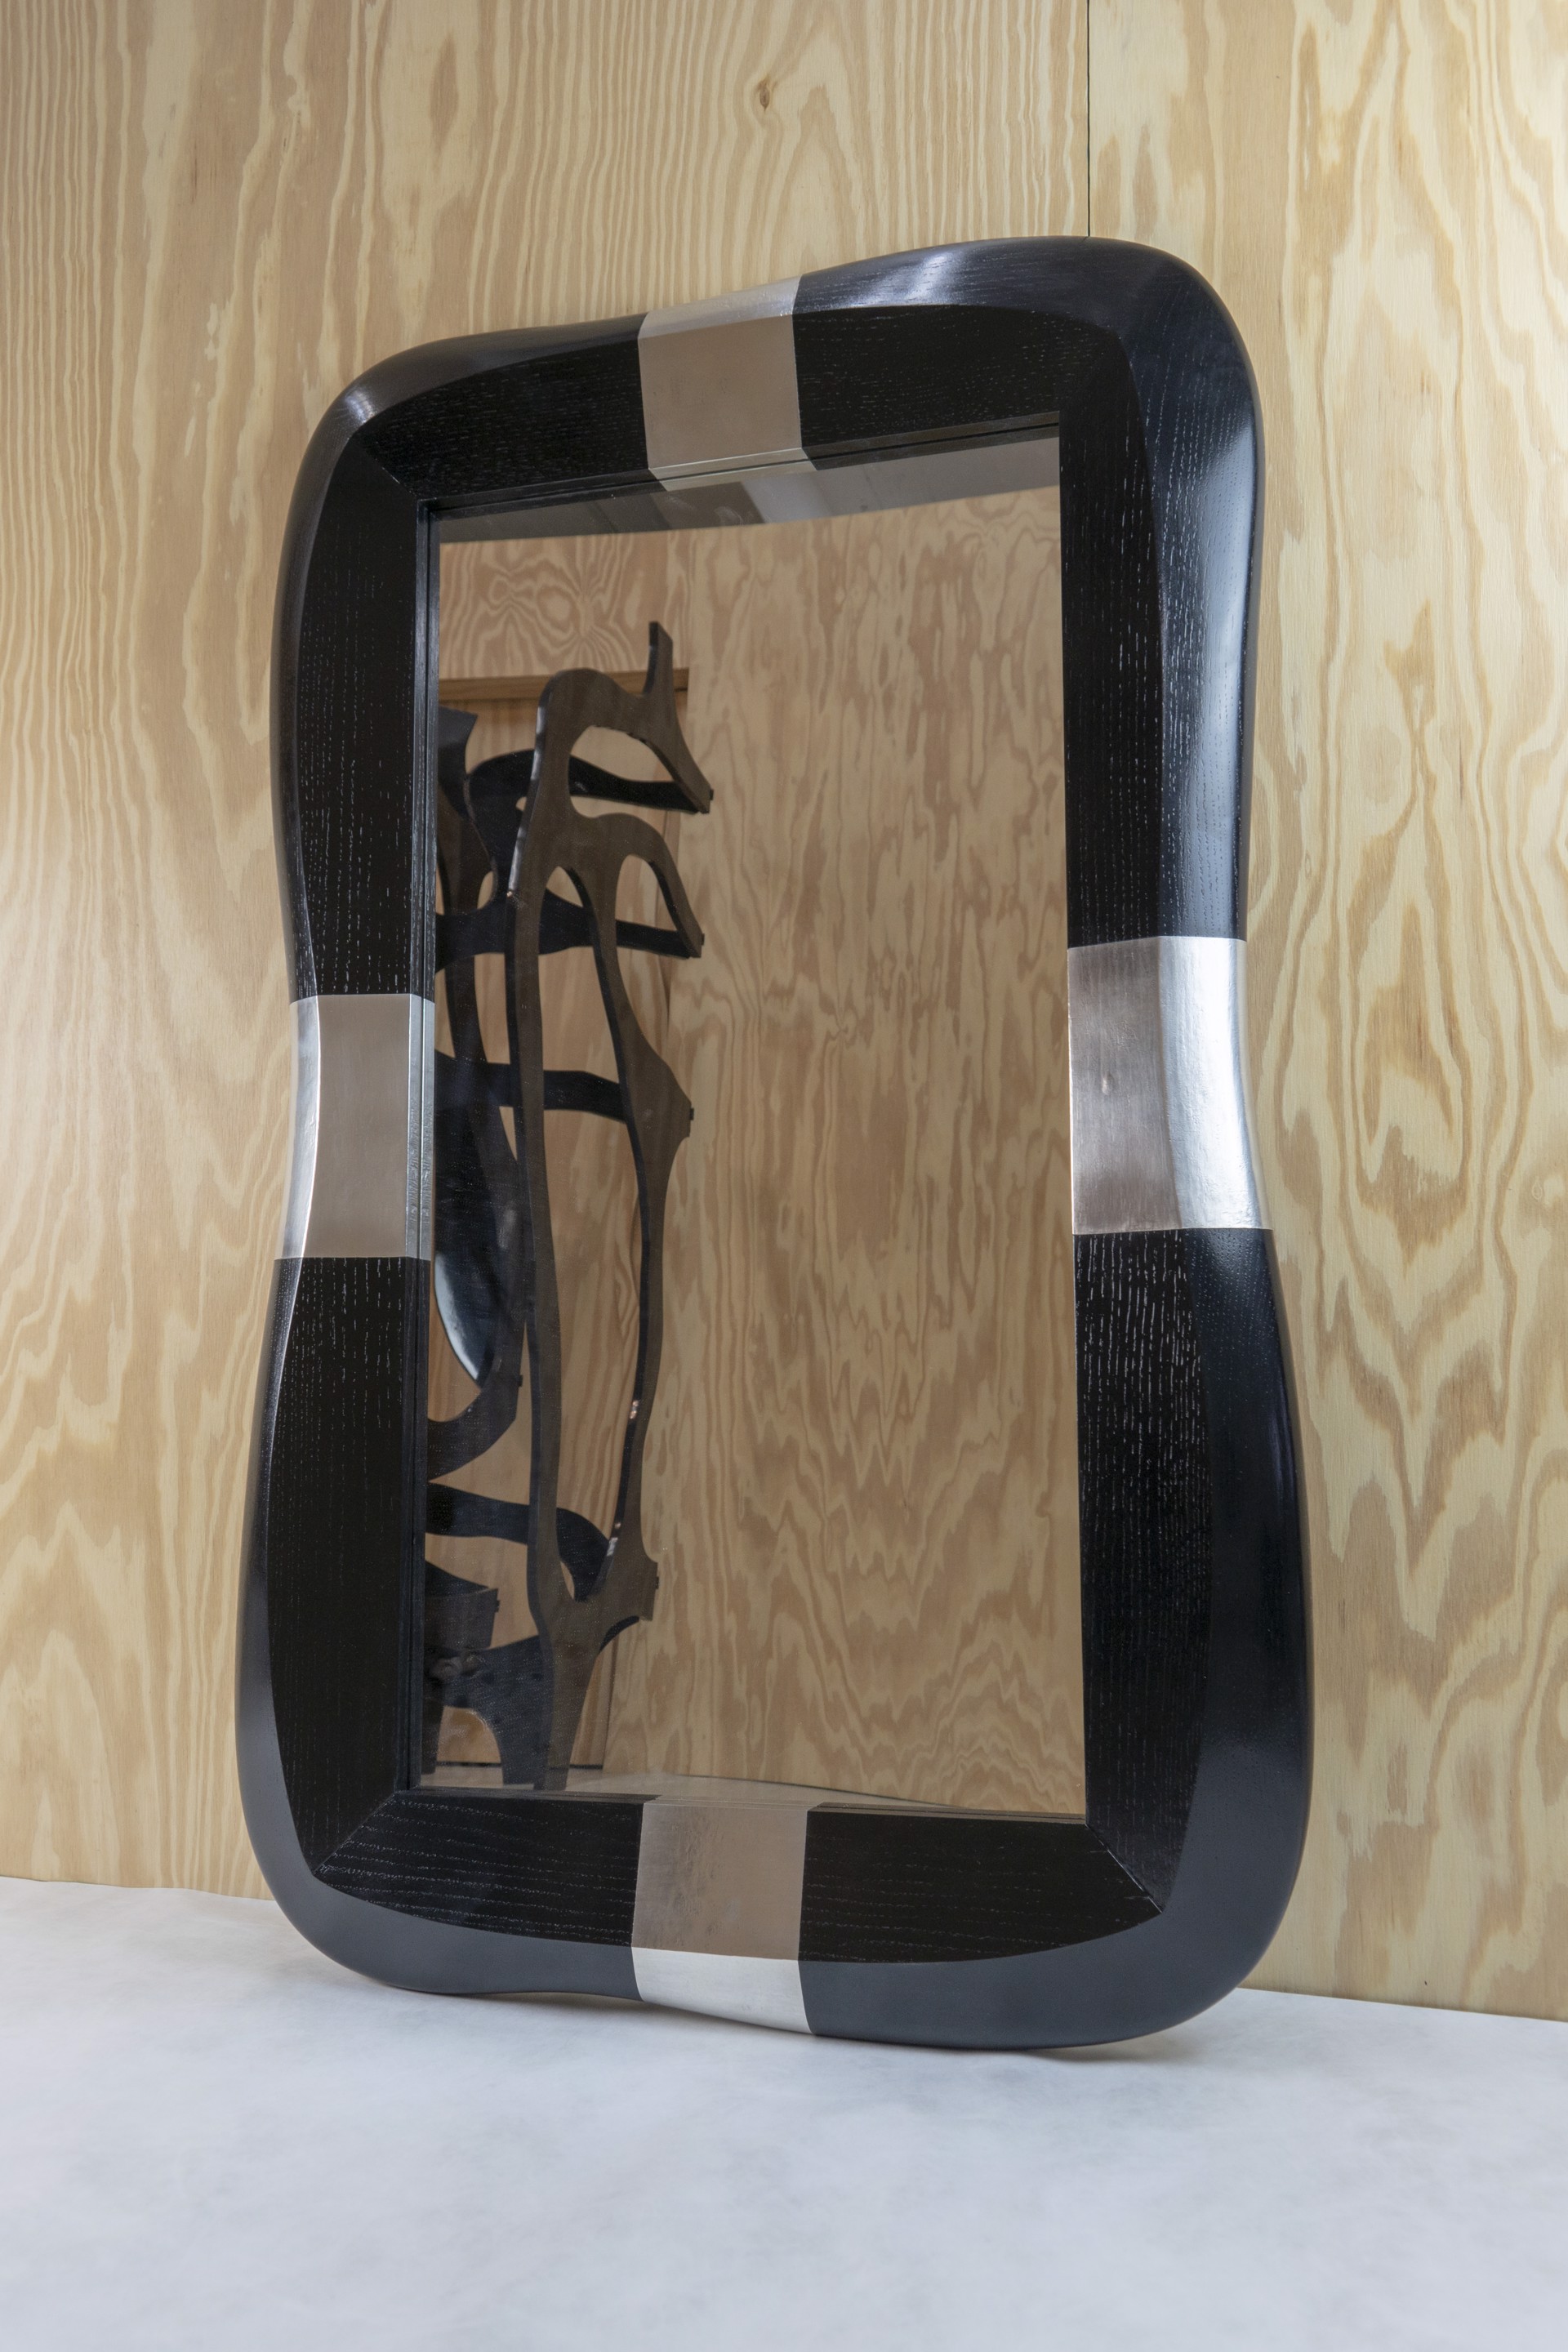 "Stanni"  Mirror by Jacques Jarrige